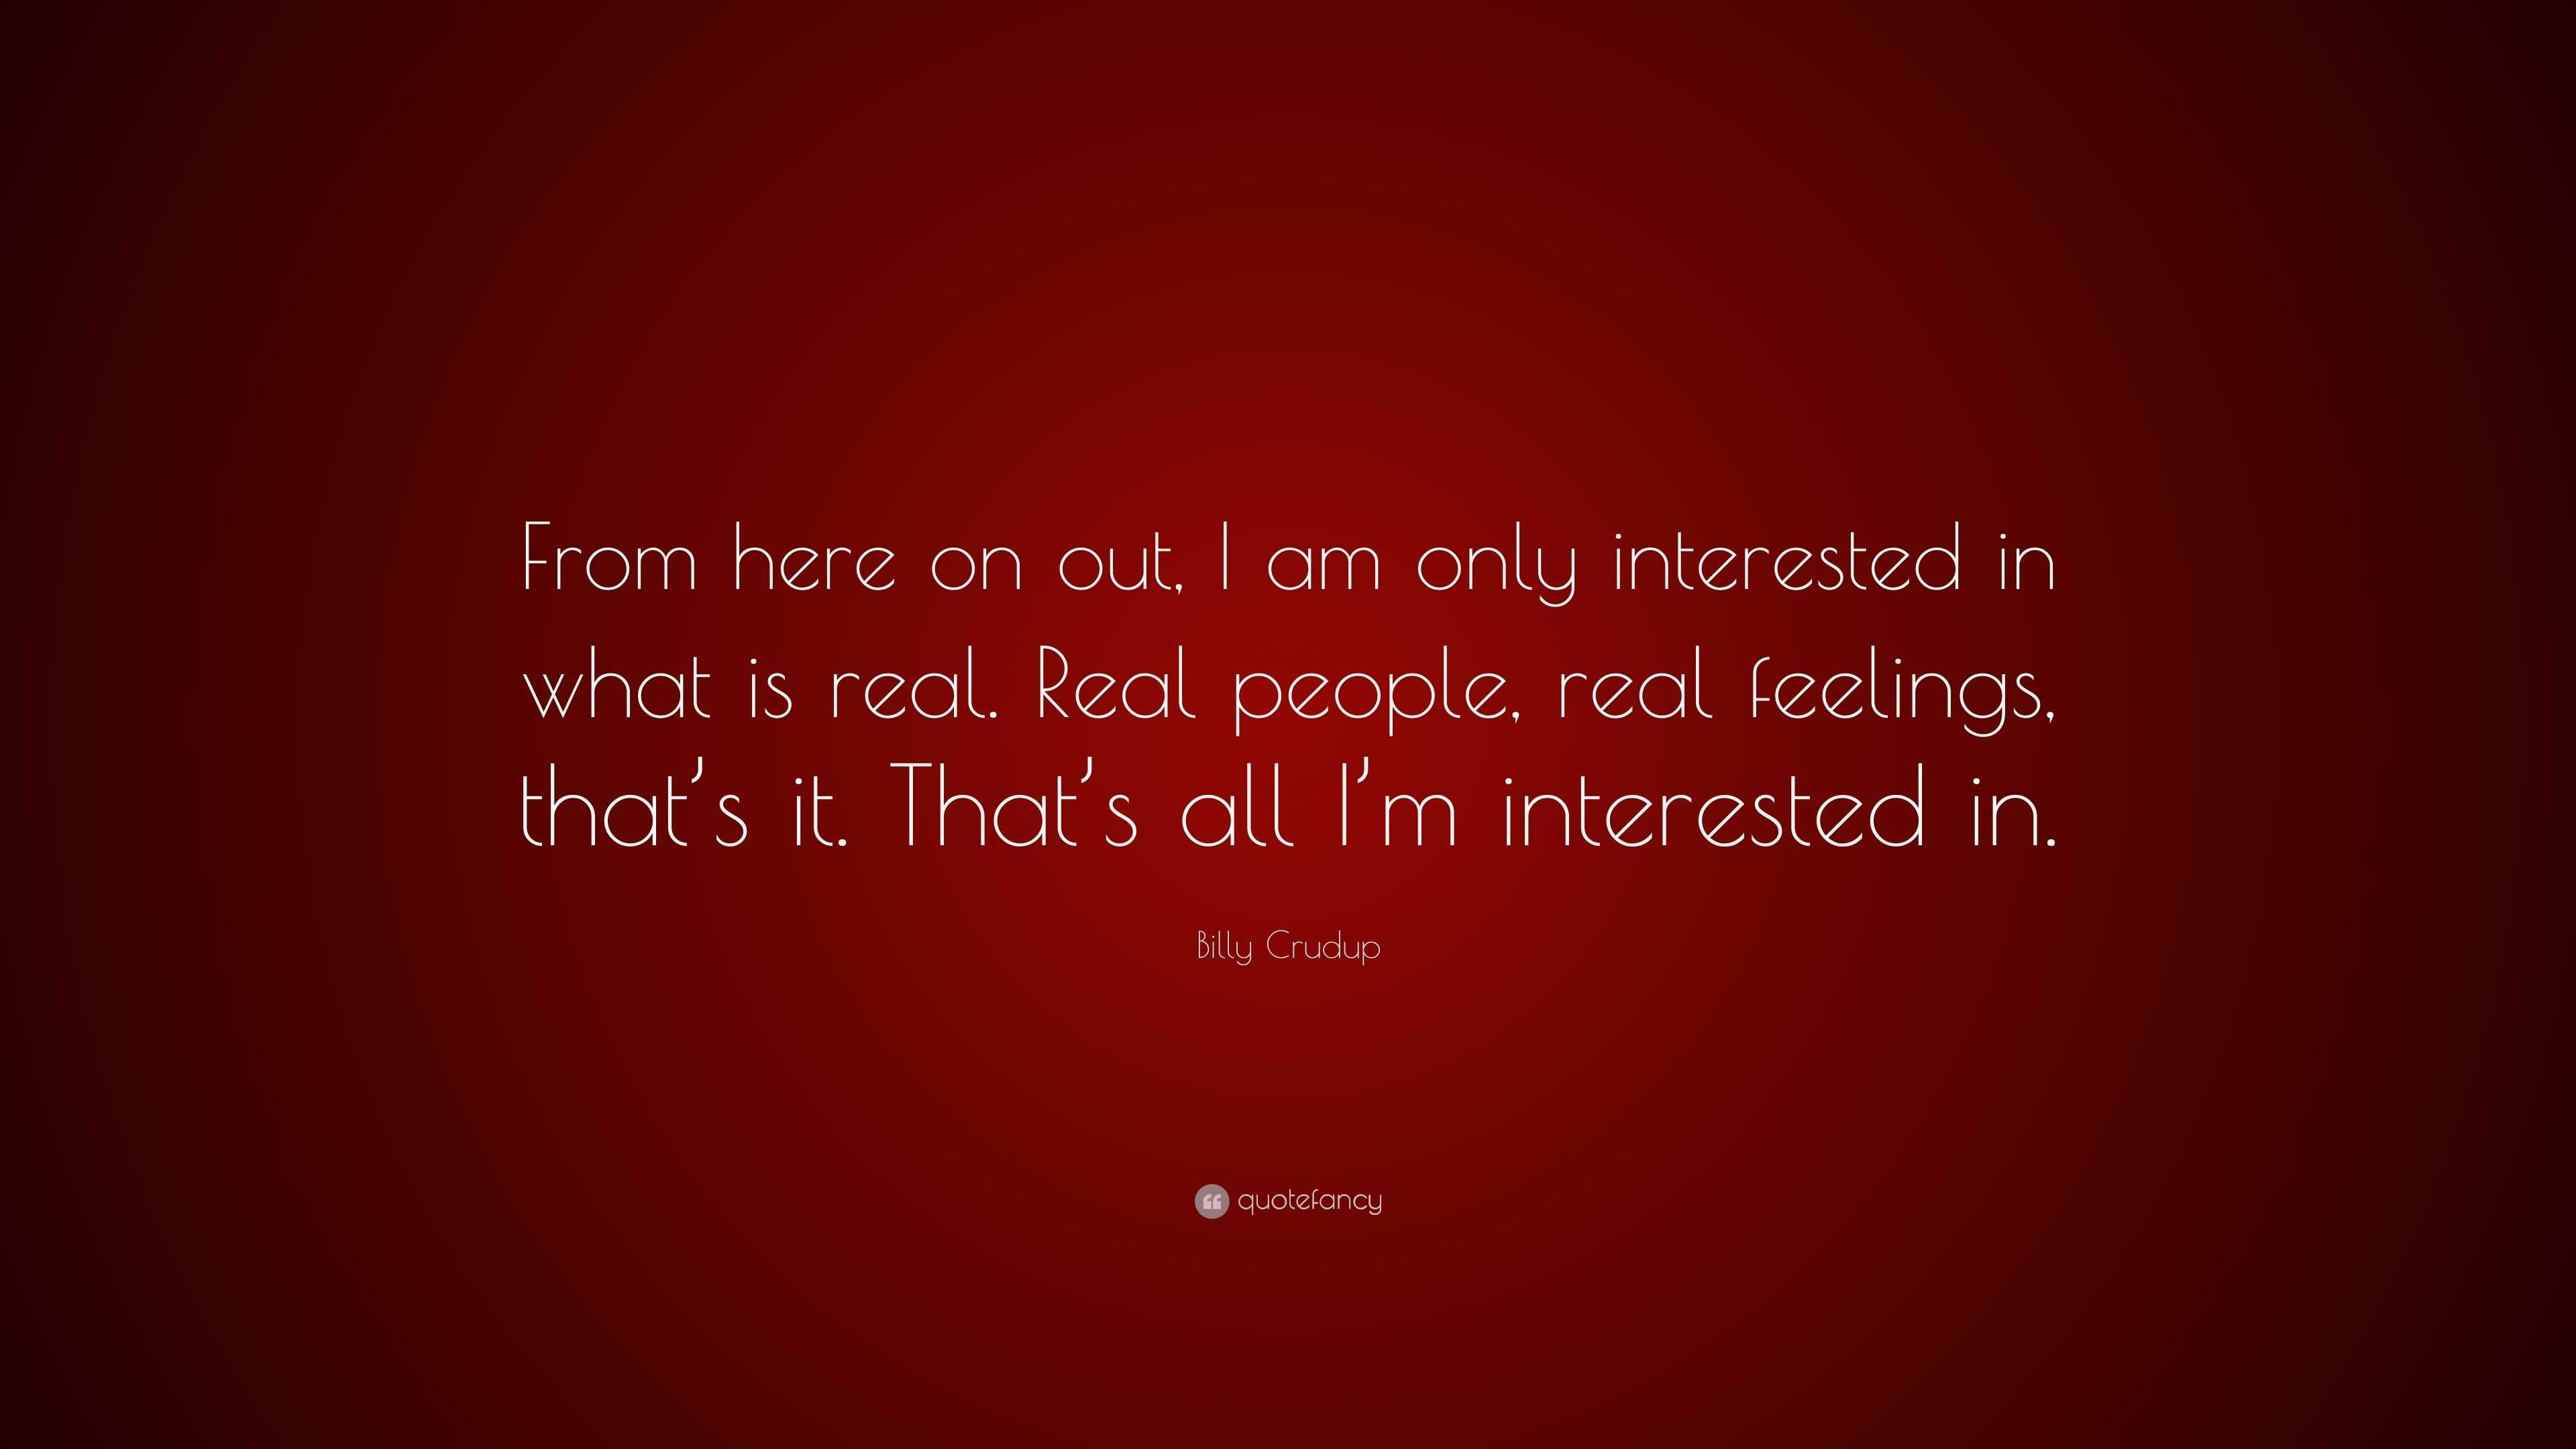 Billy Crudup Quote: “From here on out, I am only interested in what is ...